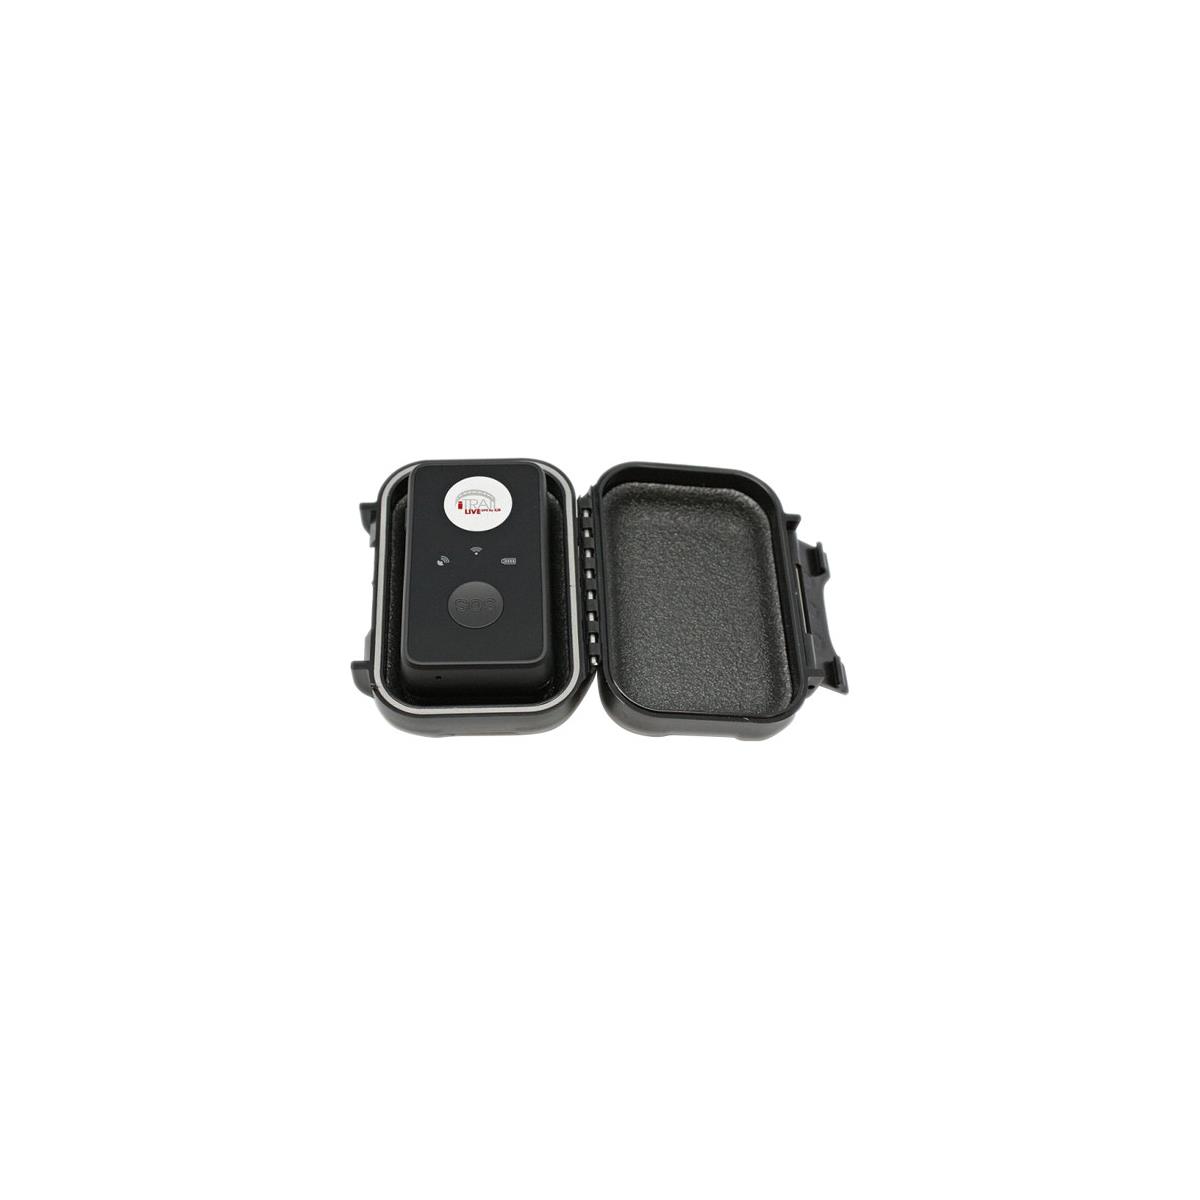 Image of KJB Security Products iTrail Solo GPS932 Worldwide GPS Tracking Device